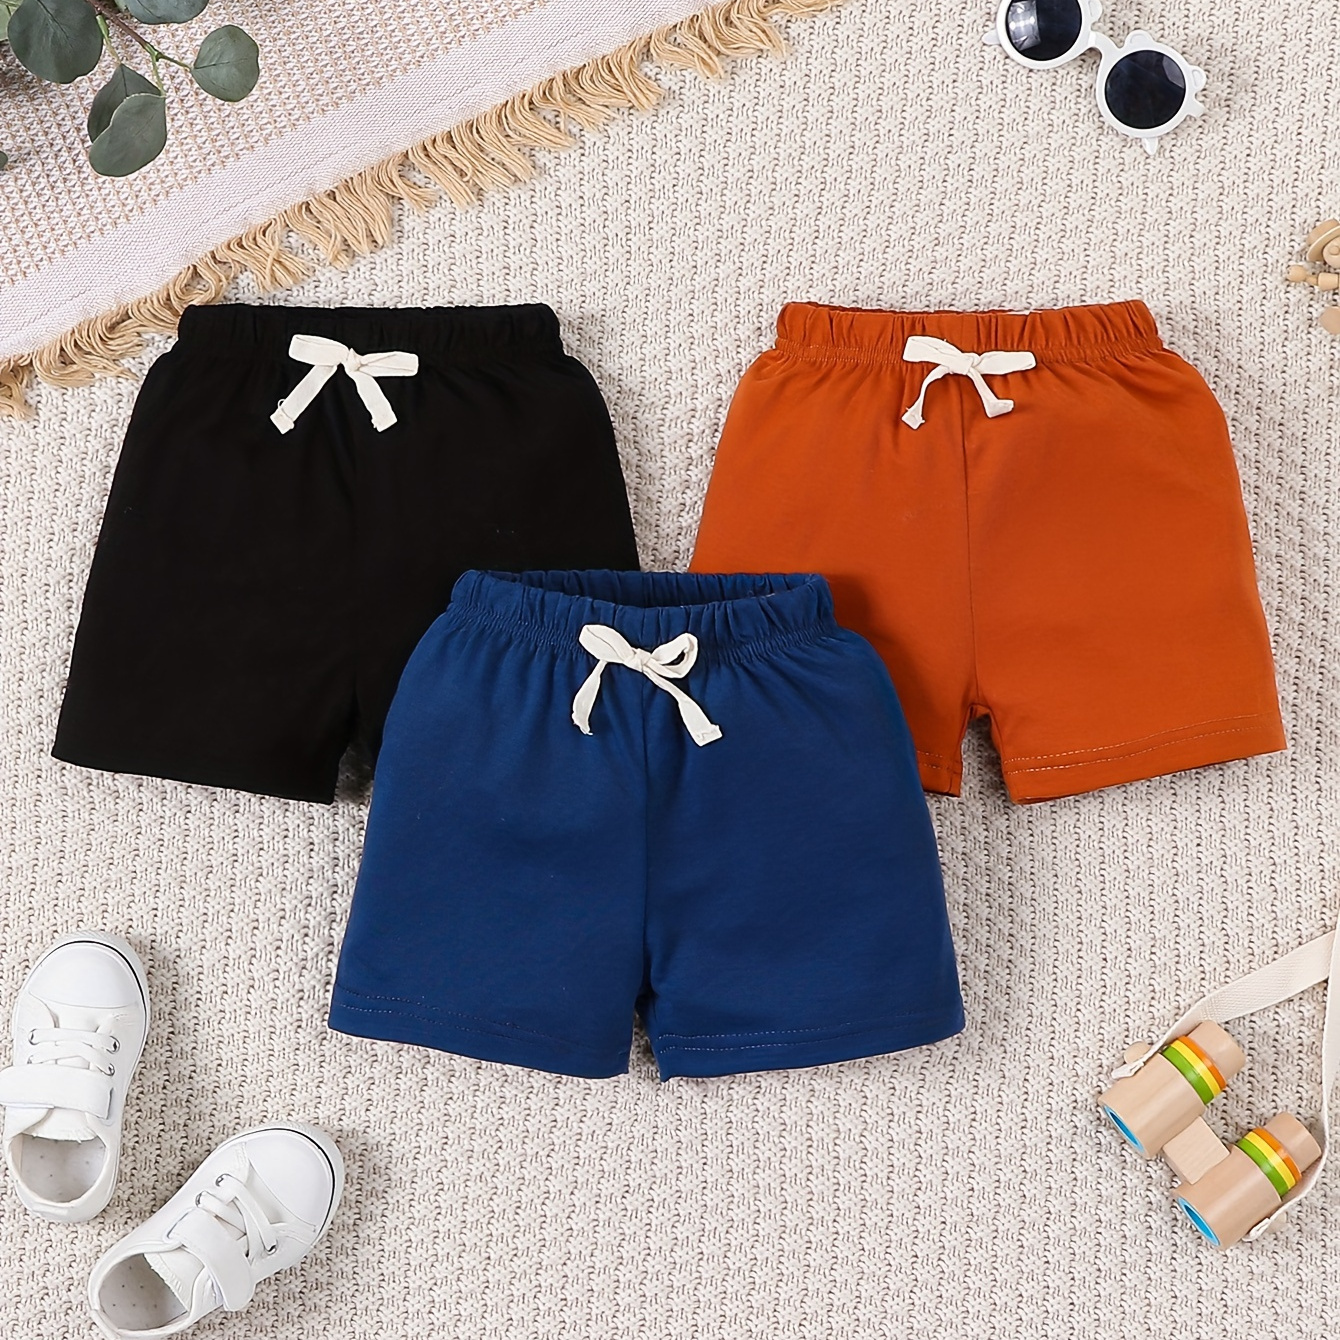 

3pcs Baby Boy's Comfy Cotton Shorts, Elastic Waist Bottoms For Daily Wear, Baby's Clothing